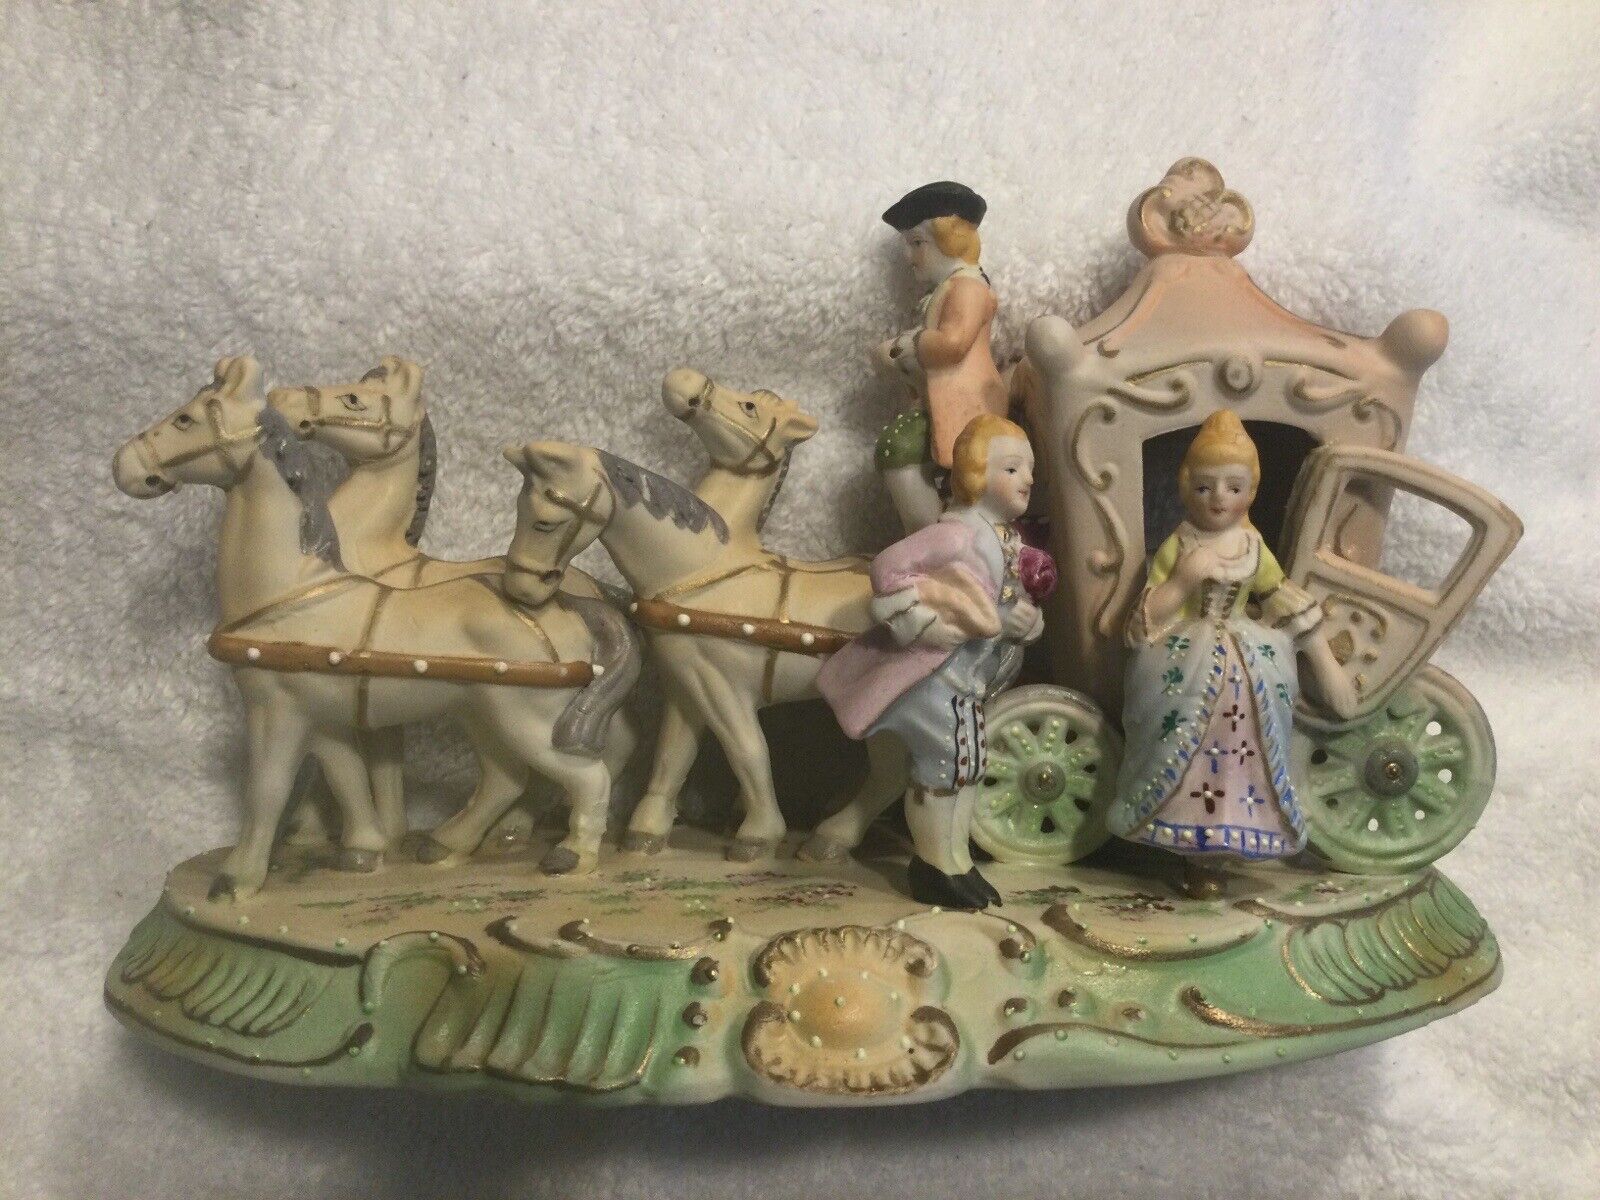 Vintage Occupied Japan Porcelain Figurine Royal Family Horse Drawn Carriage 